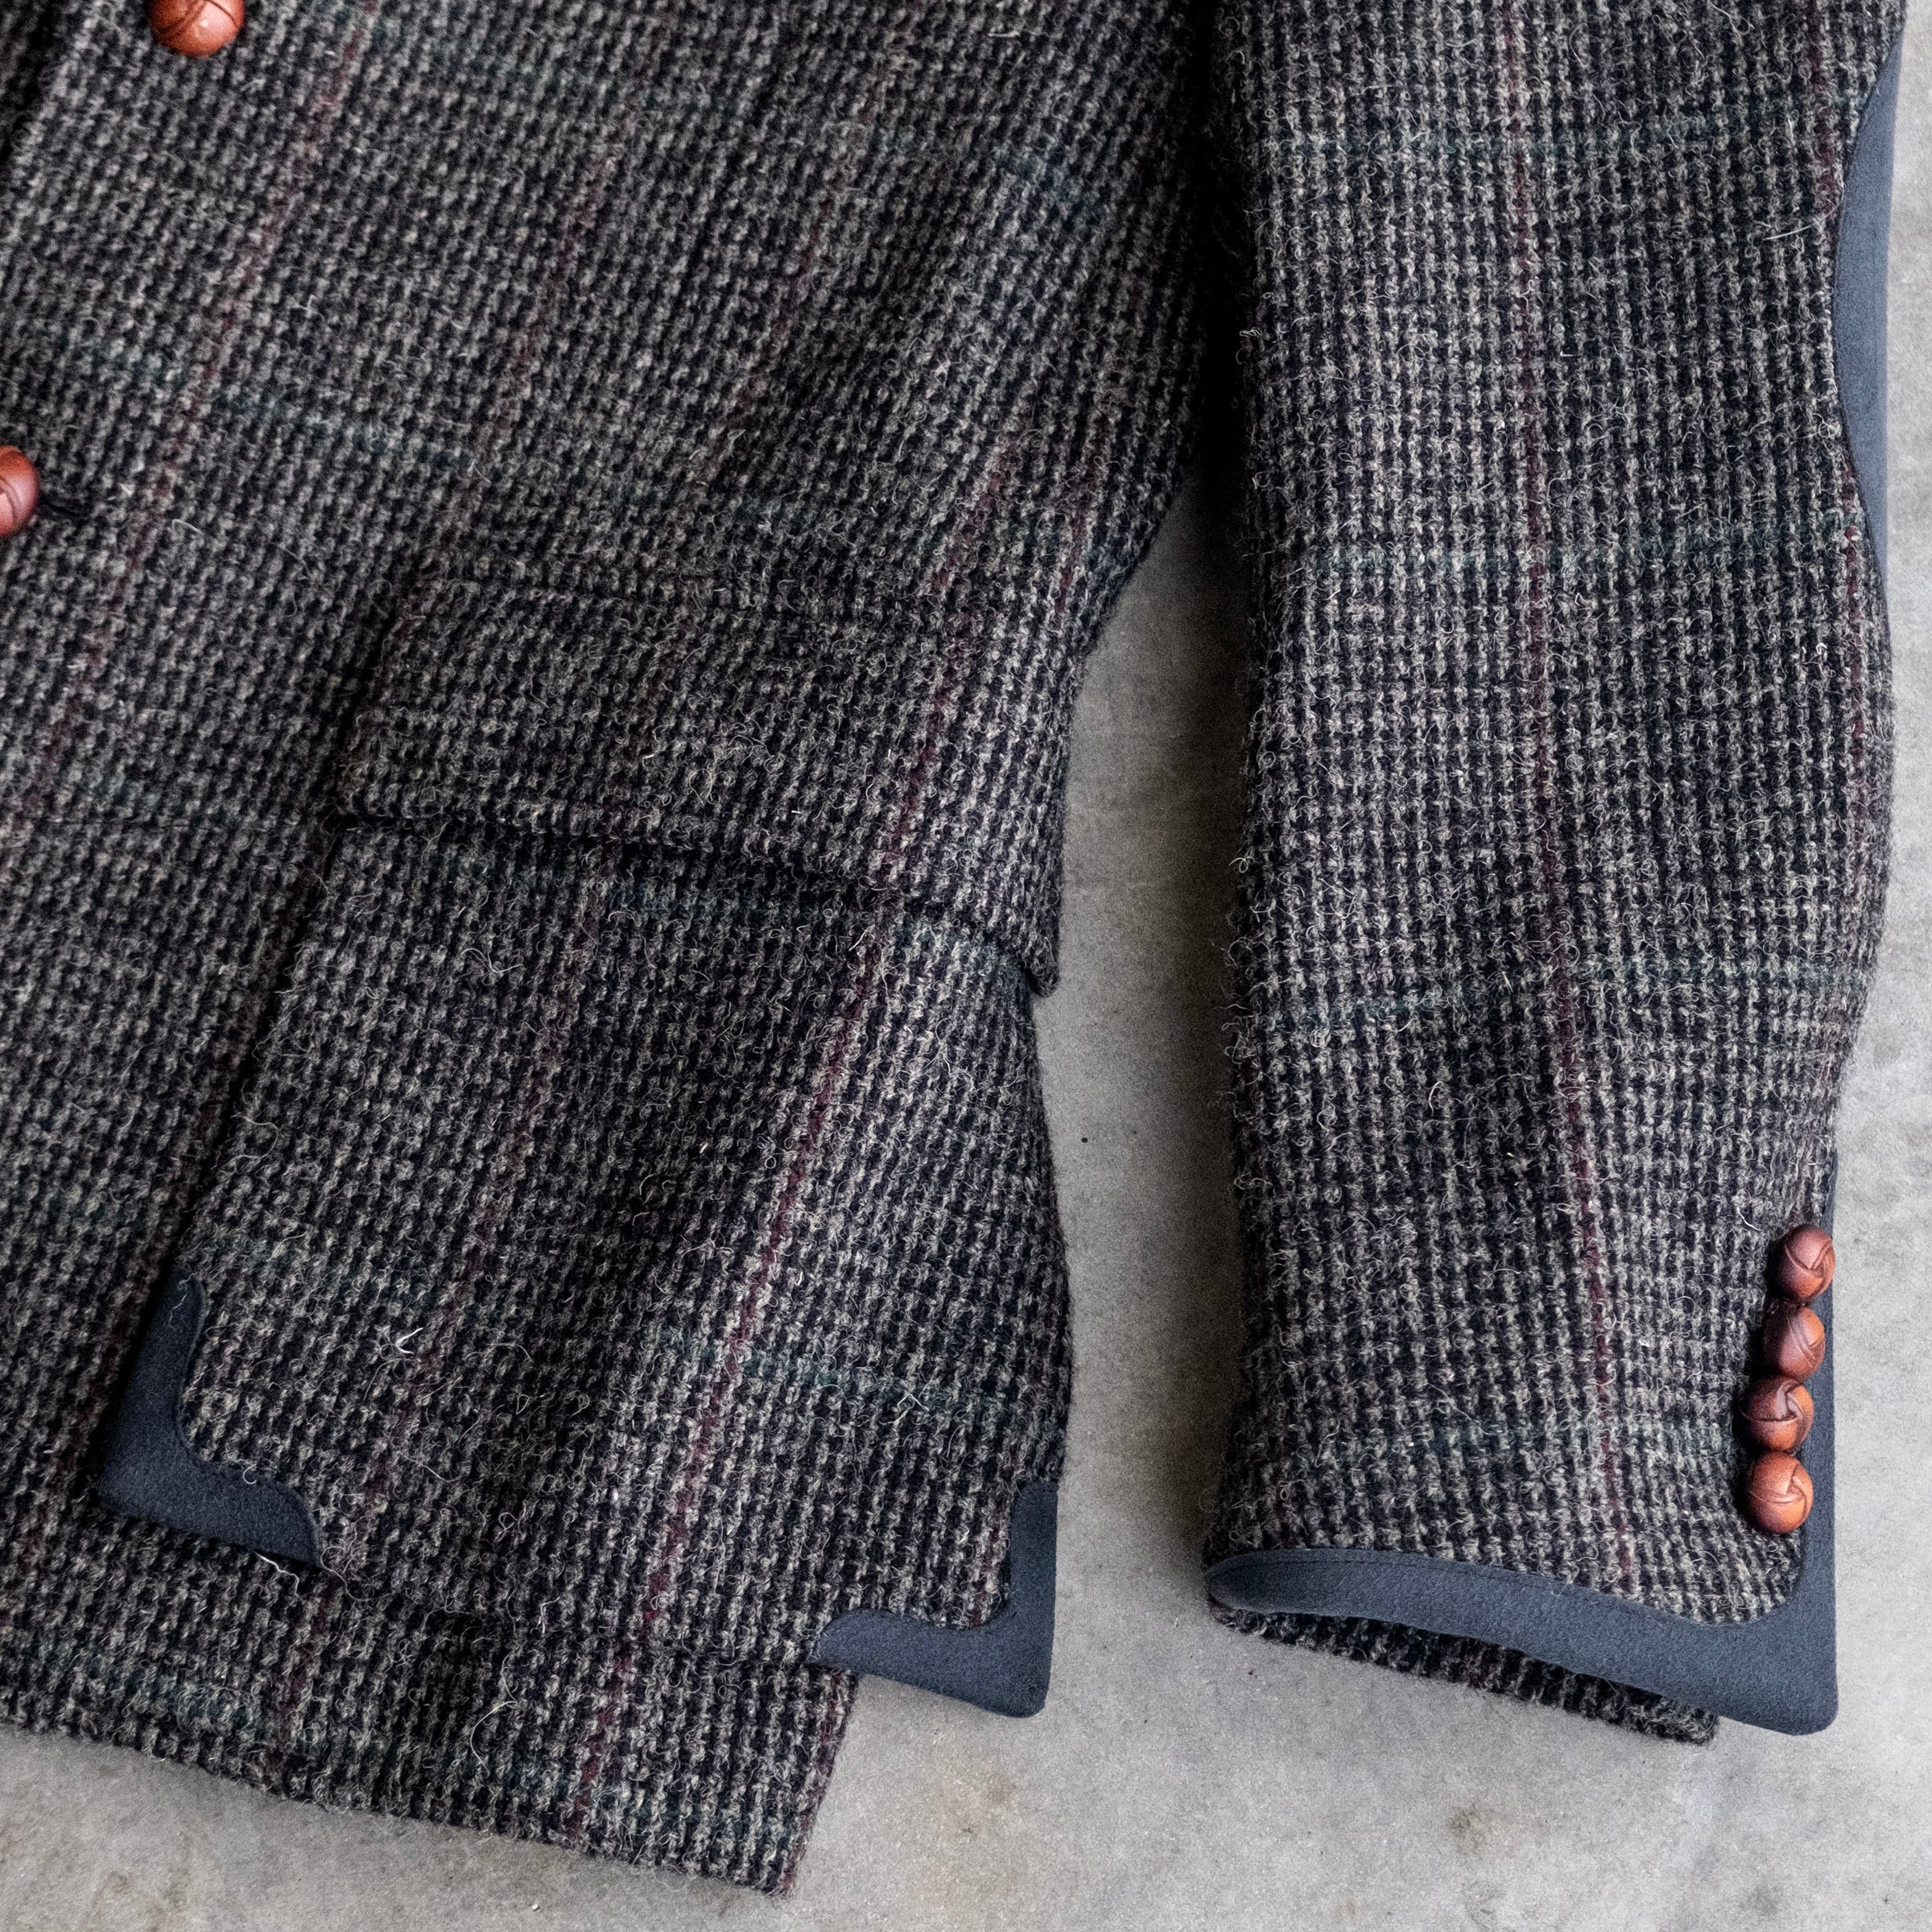 Sample Sale: Jaeger Jacket in Iron Forest Tweed Sz 40